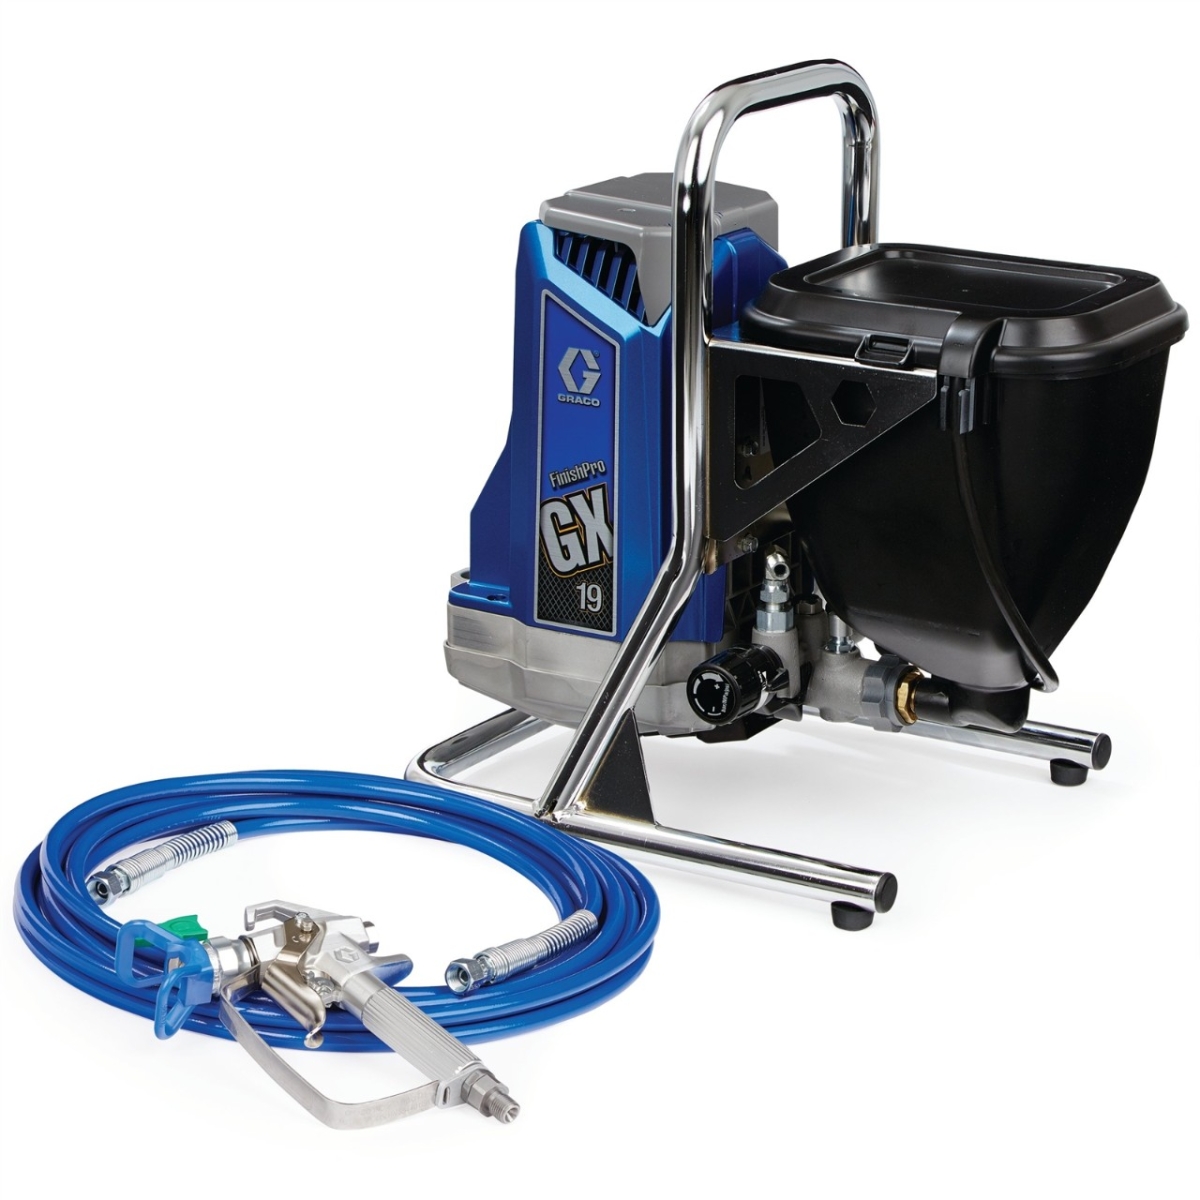 Graco FinishPro GX 19 Electric Airless Sprayer with Hopper